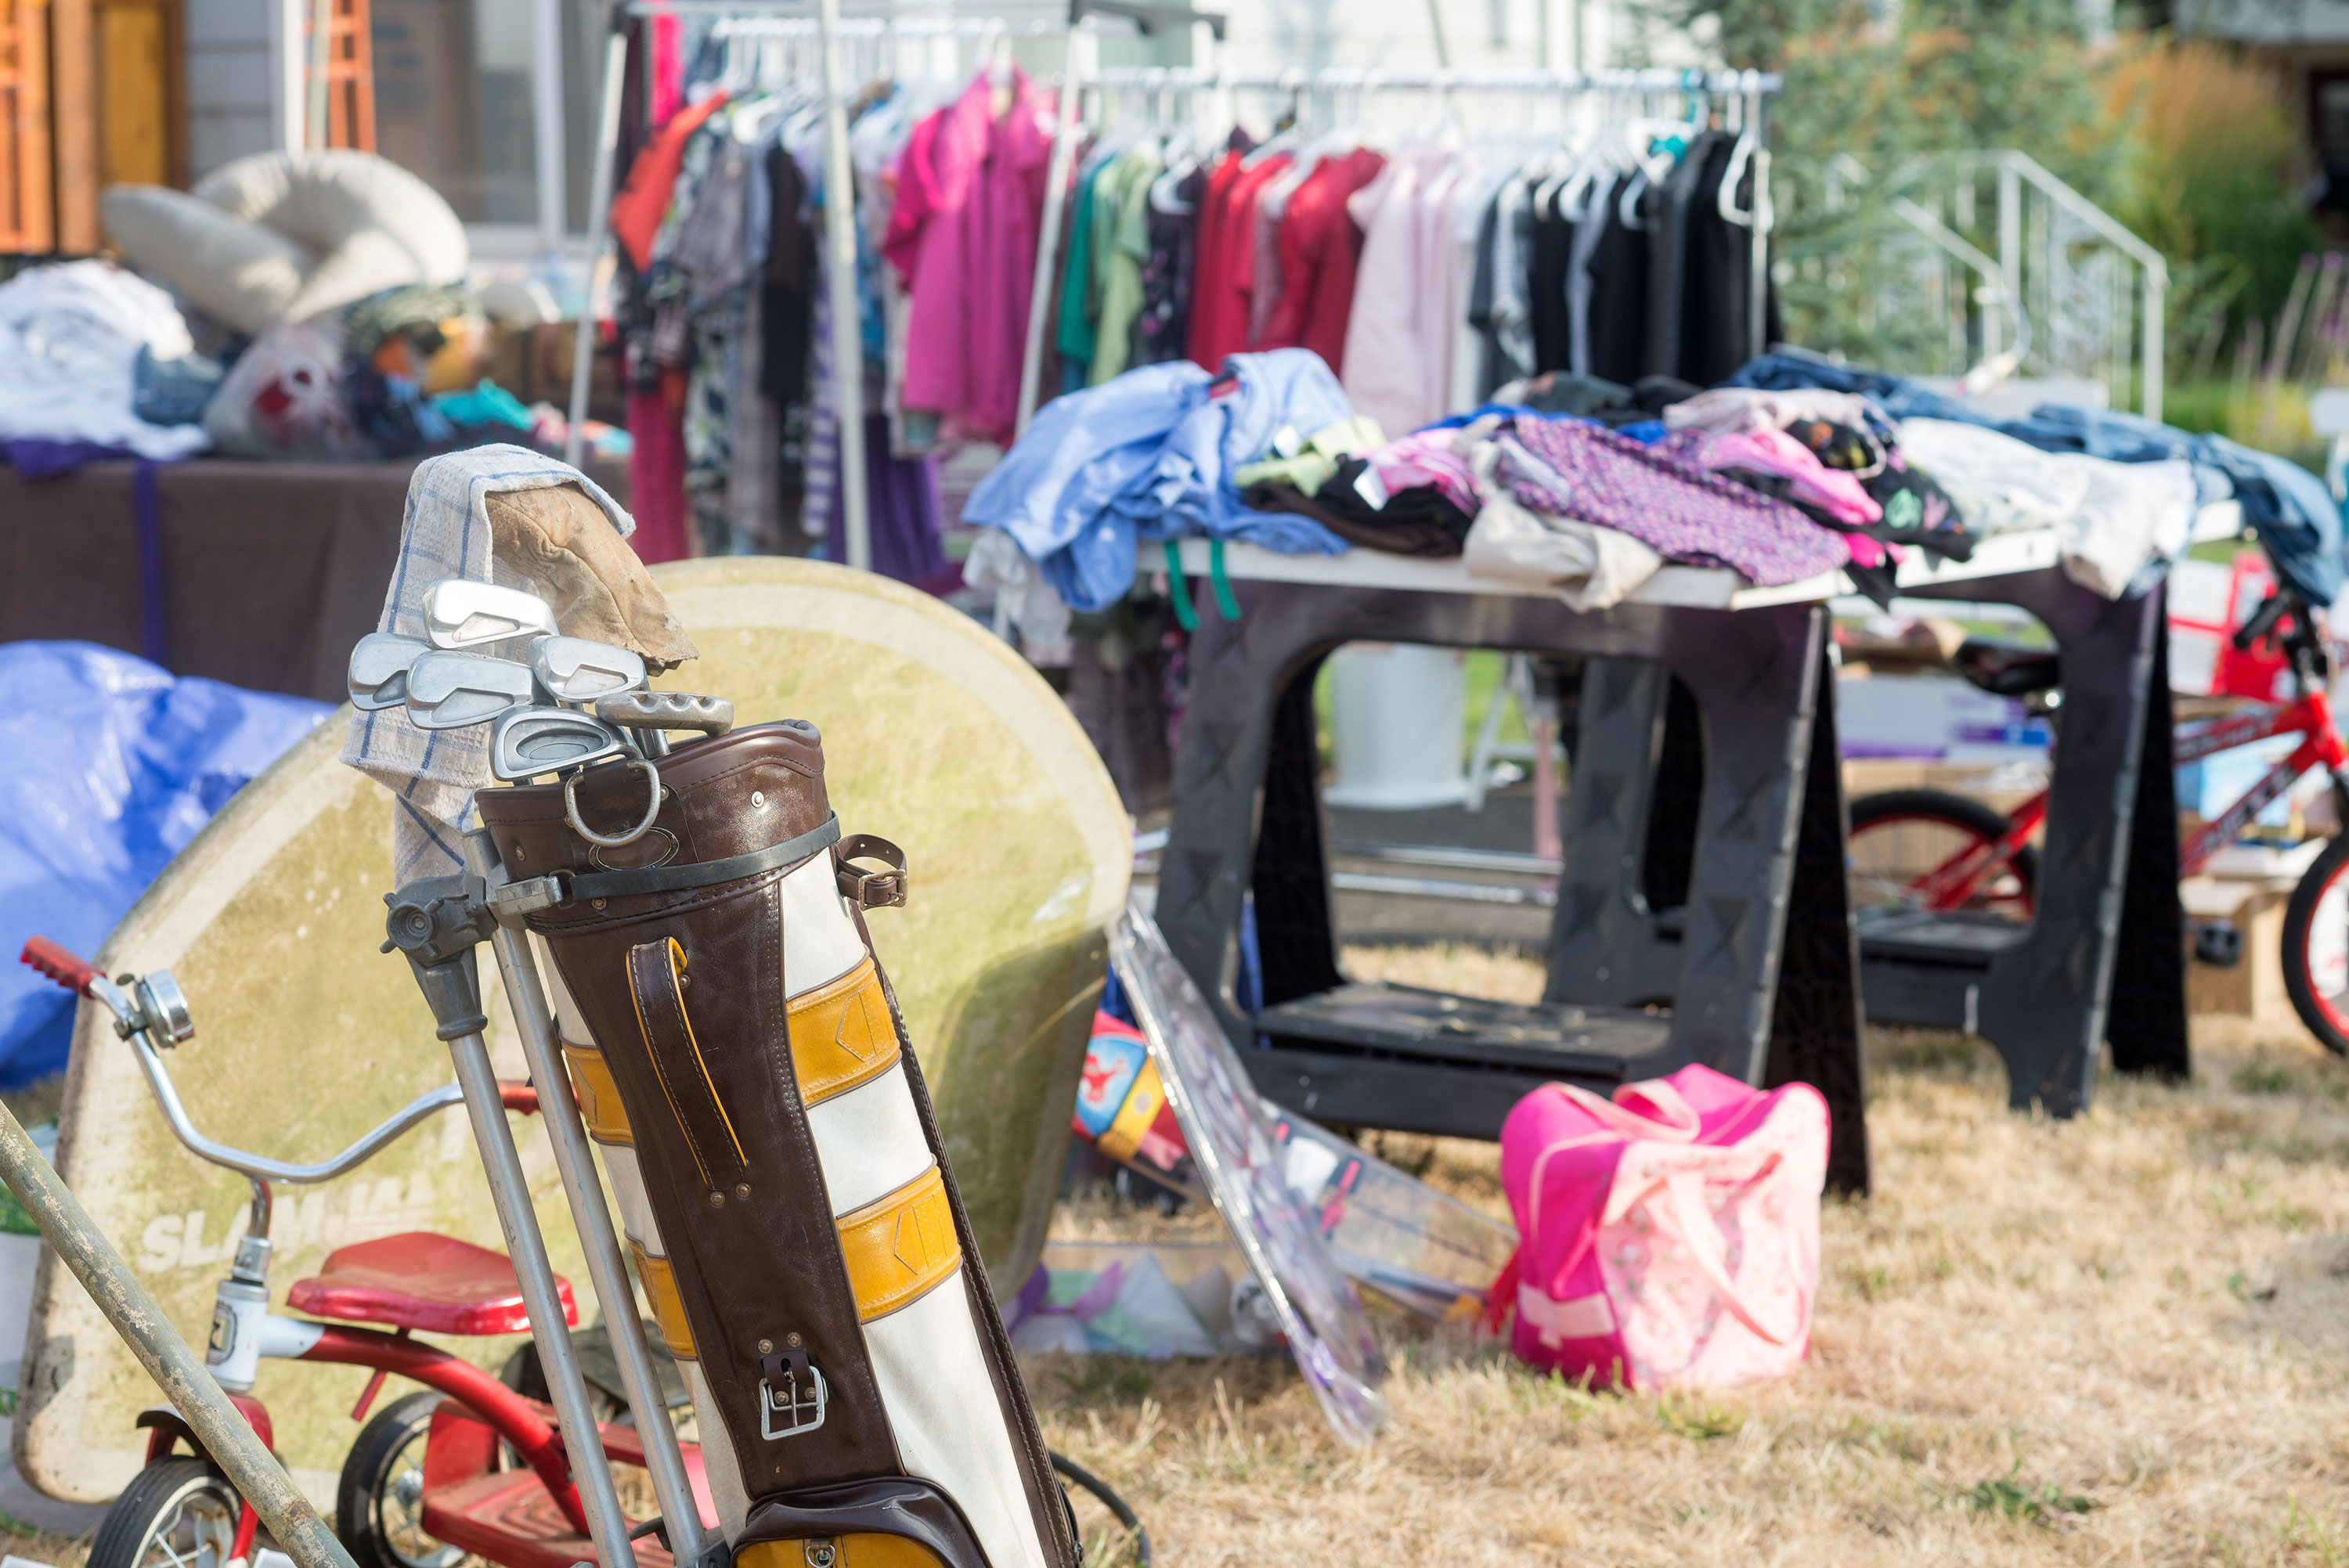 20 Items to Buy at Garage Sales This Summer That Will Help You Prep for a Crisis